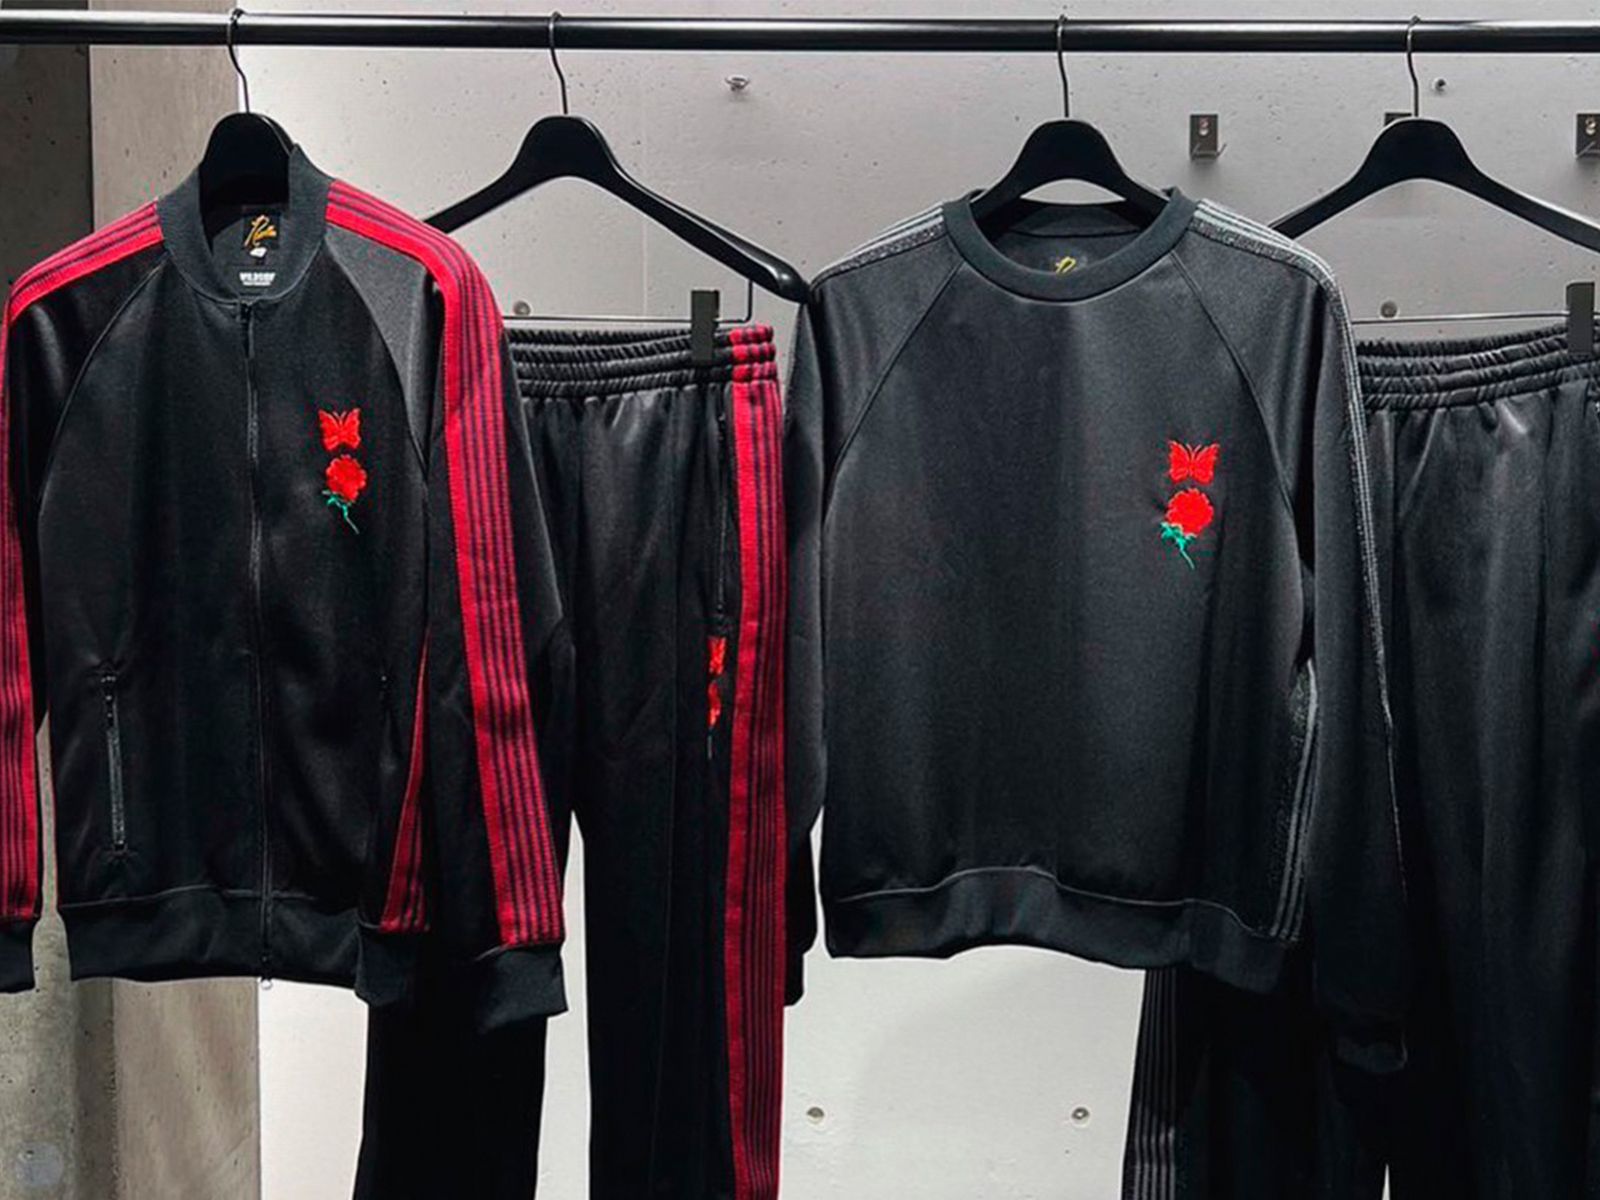 The WILDSIDE Yohji Yamamoto and NEEDLES collection is now available